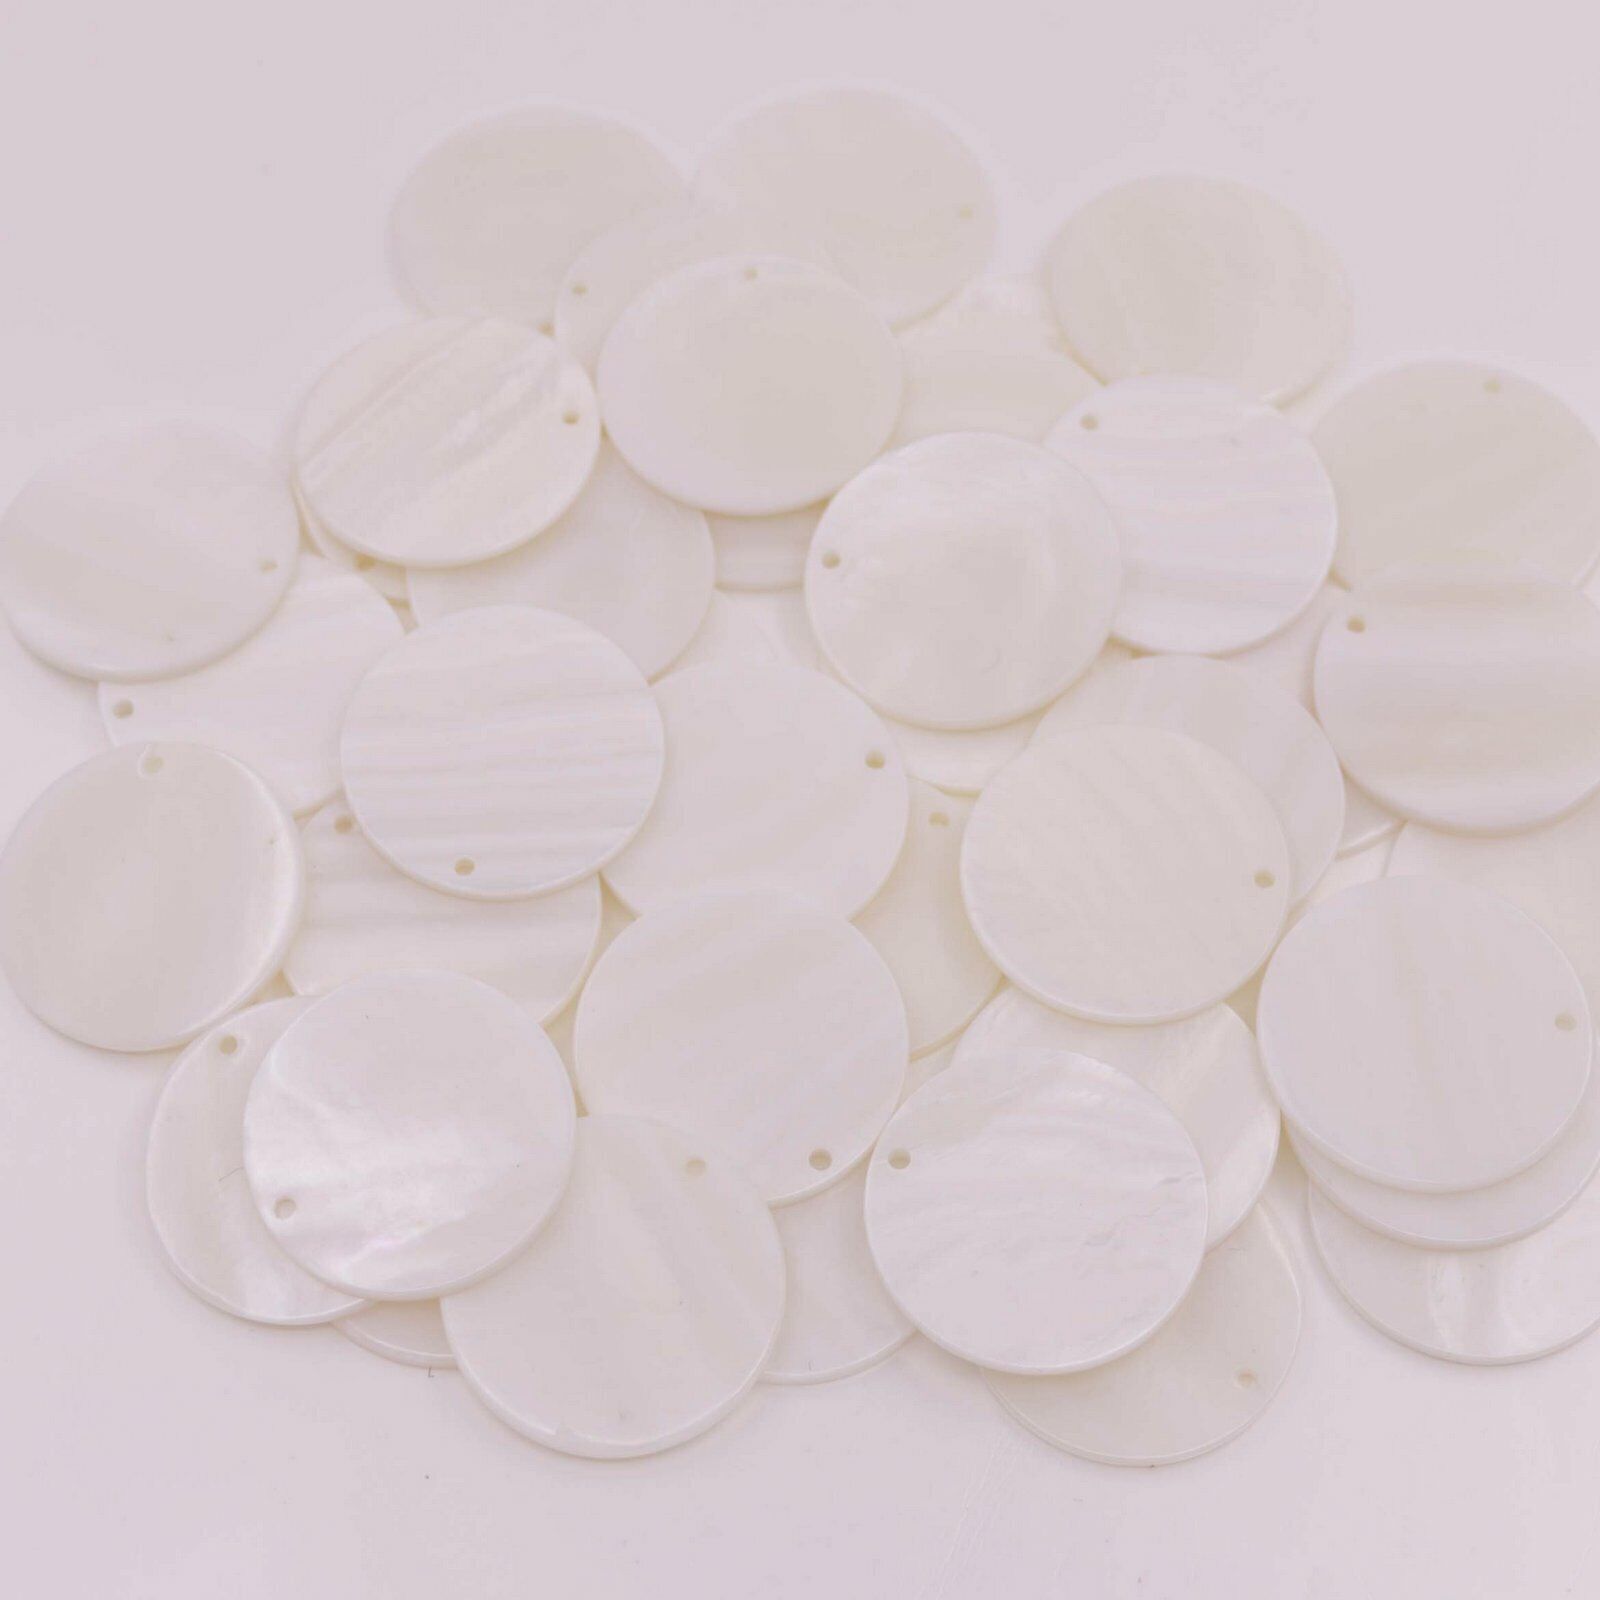 50 Pcs 30mm Round Coin Shell White Mother Of Pearl Pendants Loose Beads